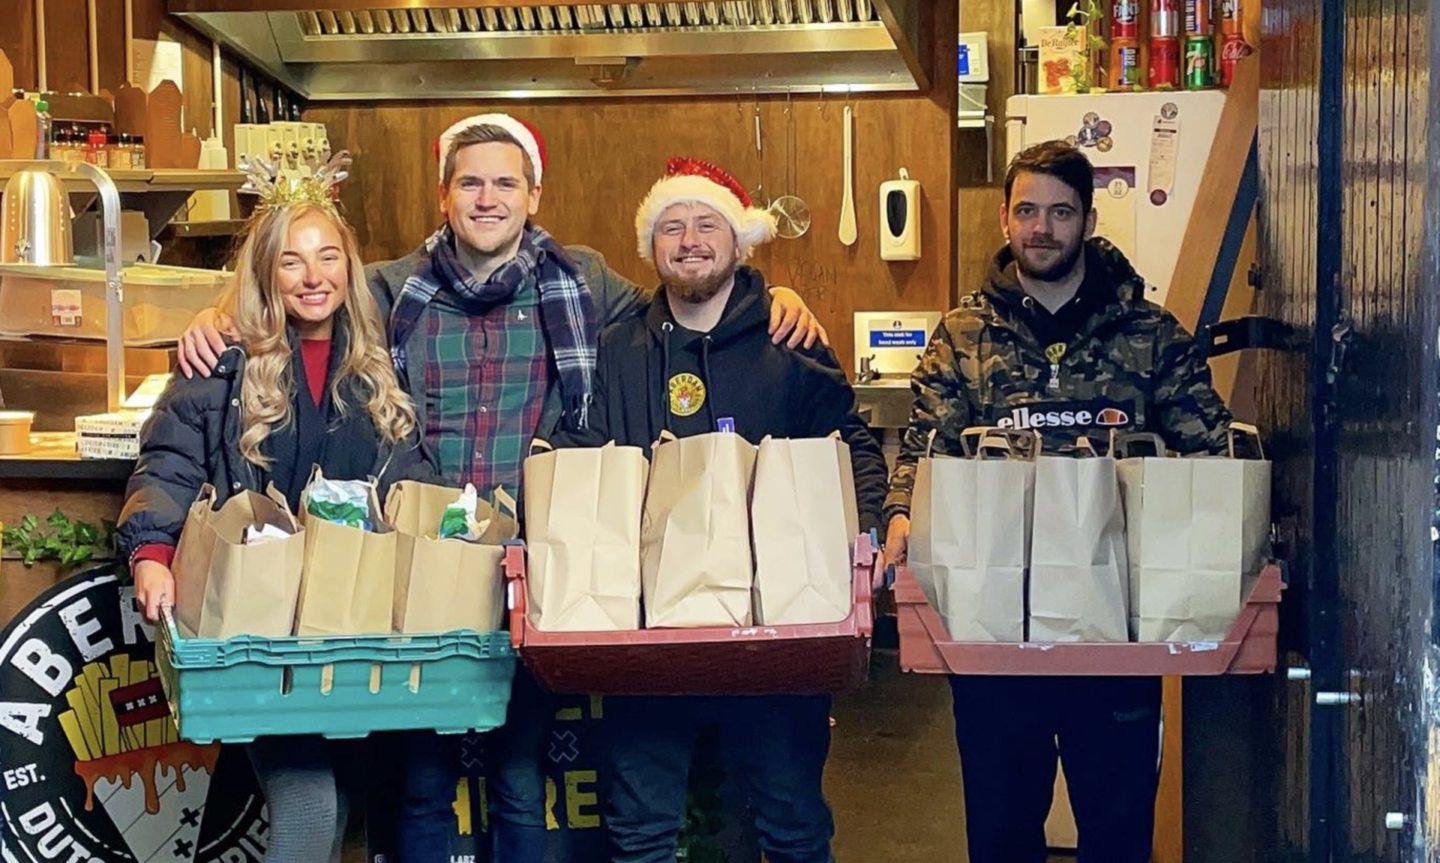 Aberdam staff standing with festive food parcels in trays.